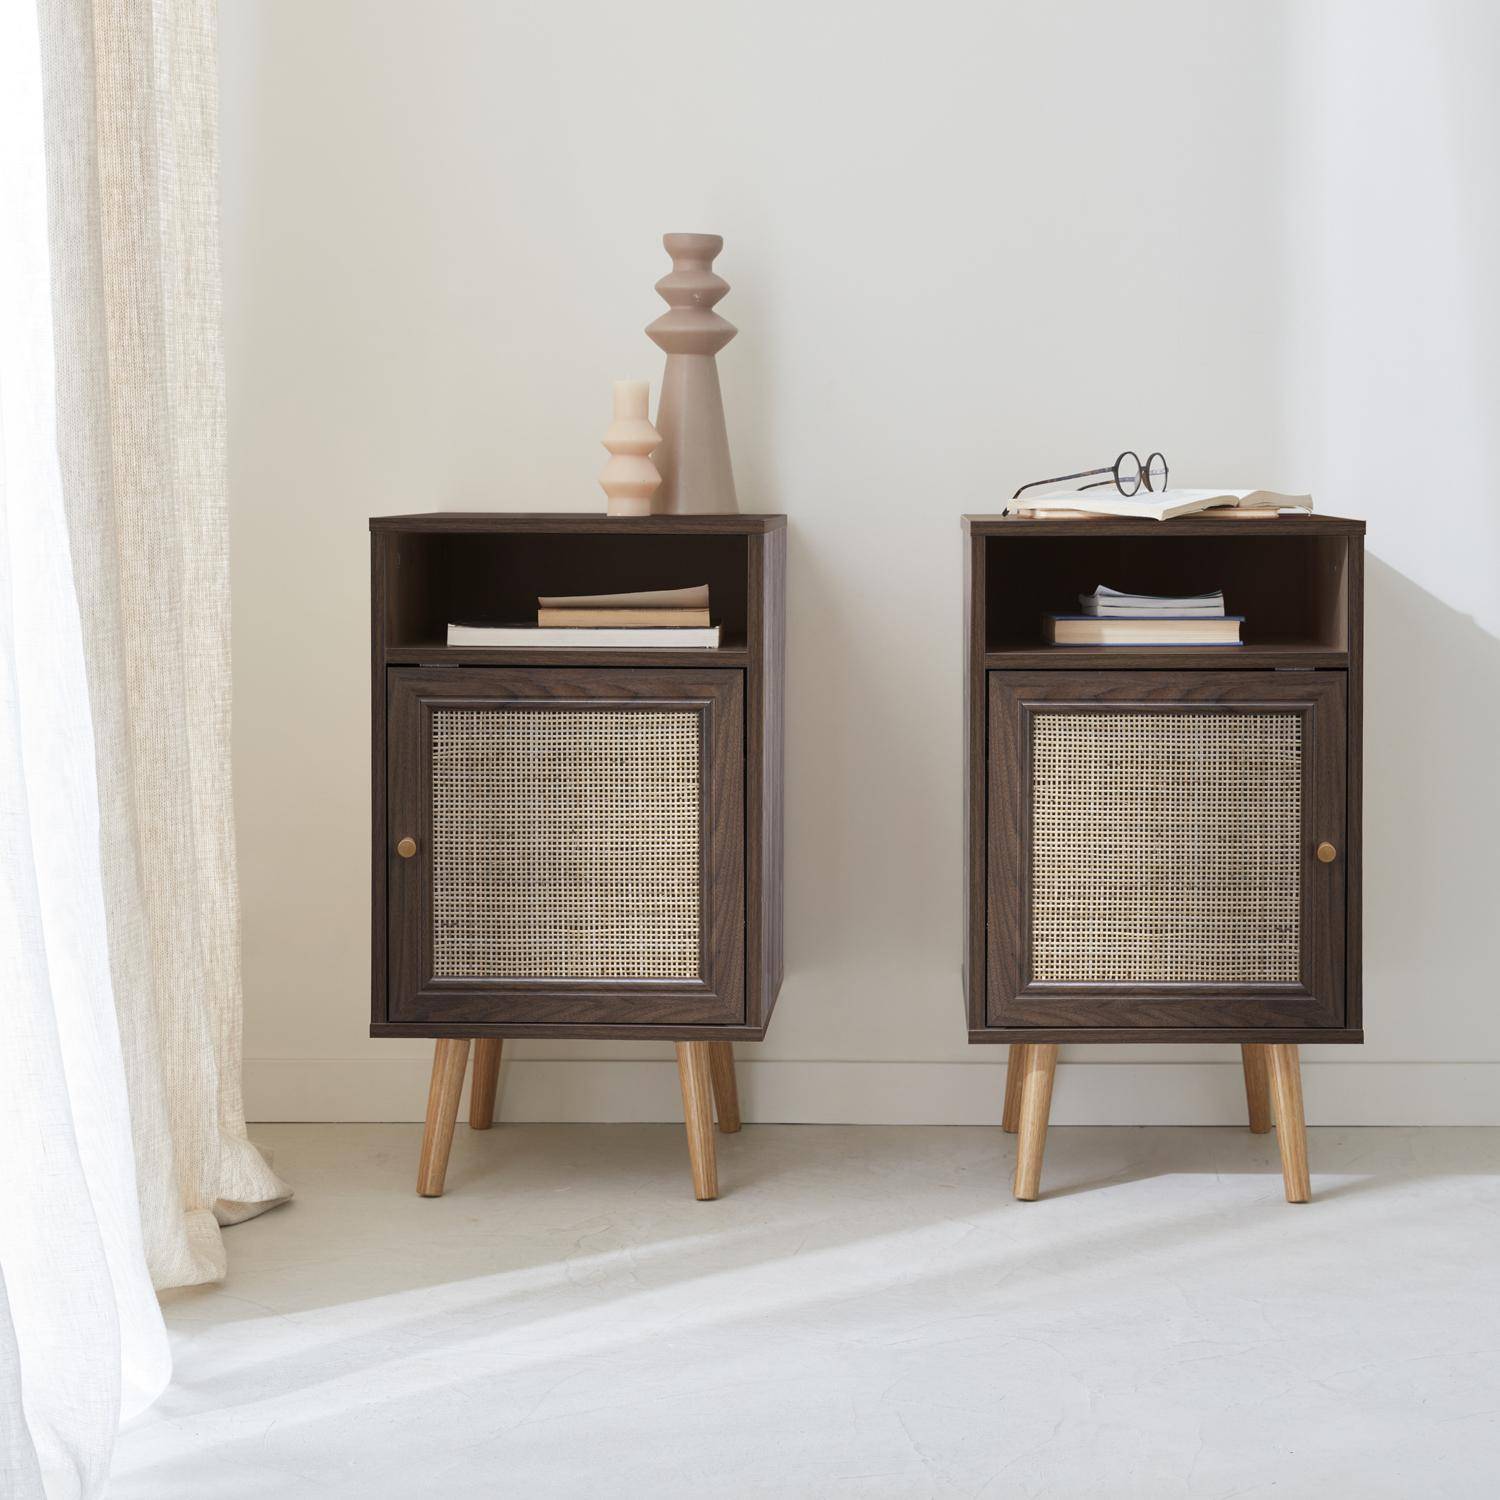 Pair of Scandi-style wood and cane rattan bedside tables with cupboard, 40x39x70cm - Boheme - Dark Wood colour,sweeek,Photo2